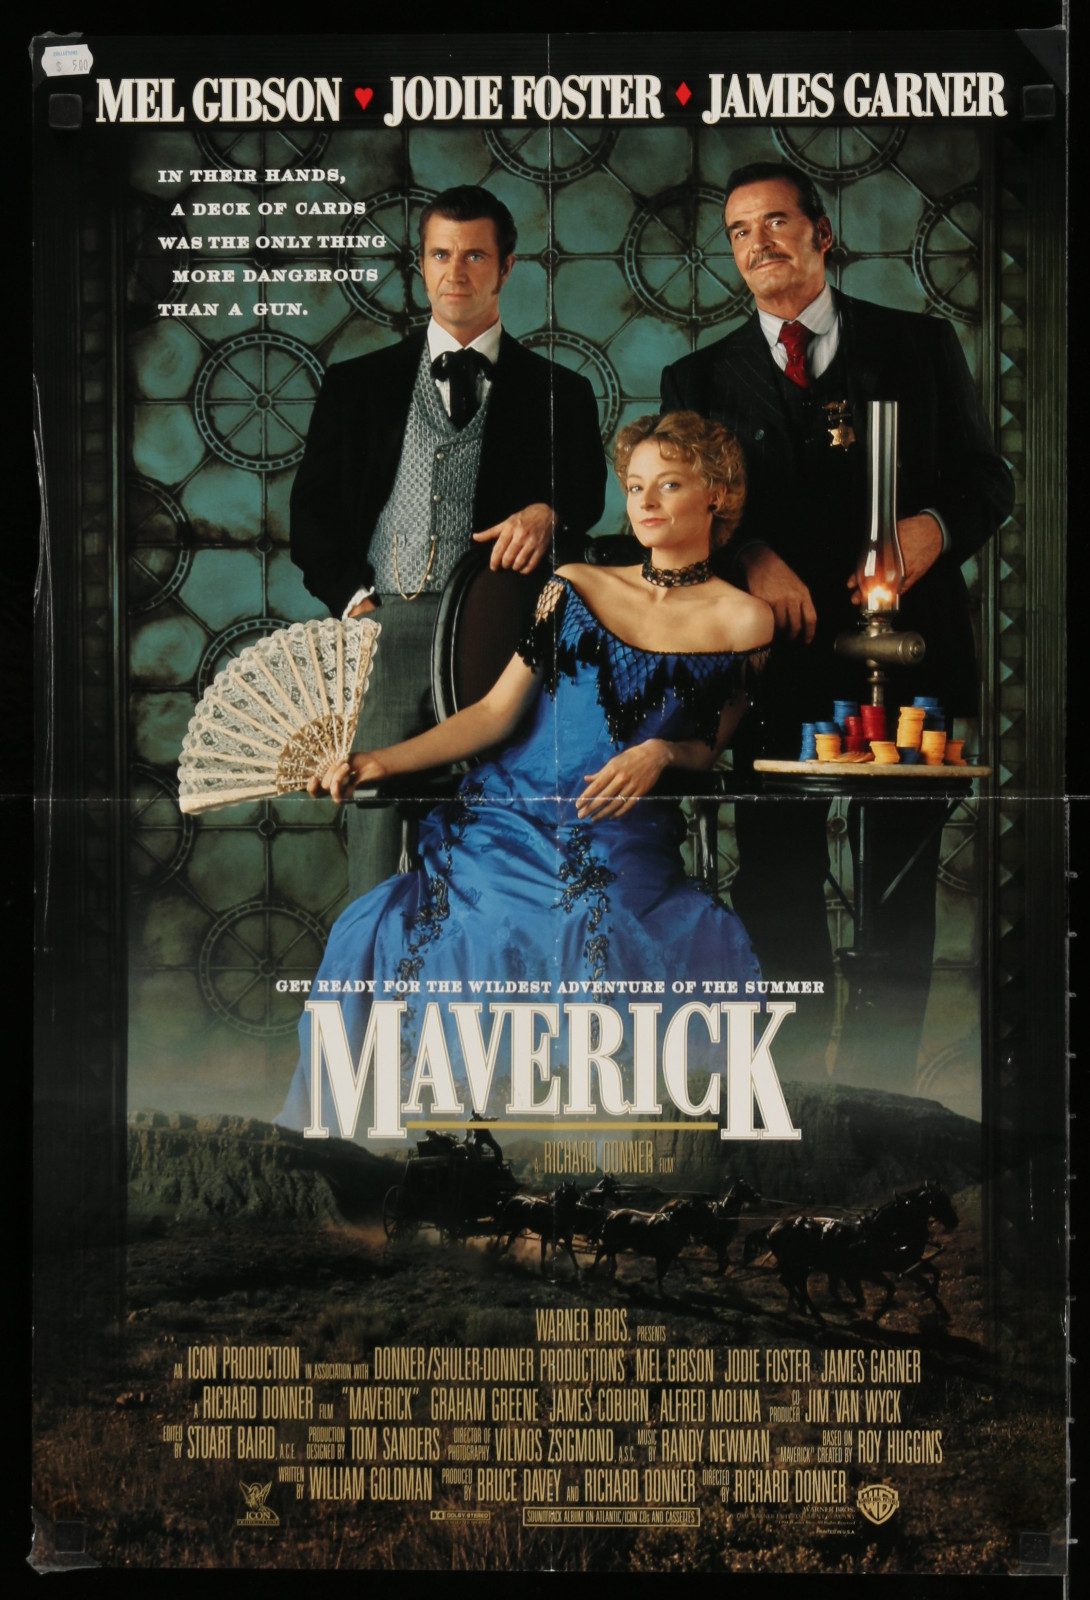 Maverick 1H185 A Part Of A Lot 6 Folded Special Posters '80S-90S Great Images From A Variety Of Different Movies!